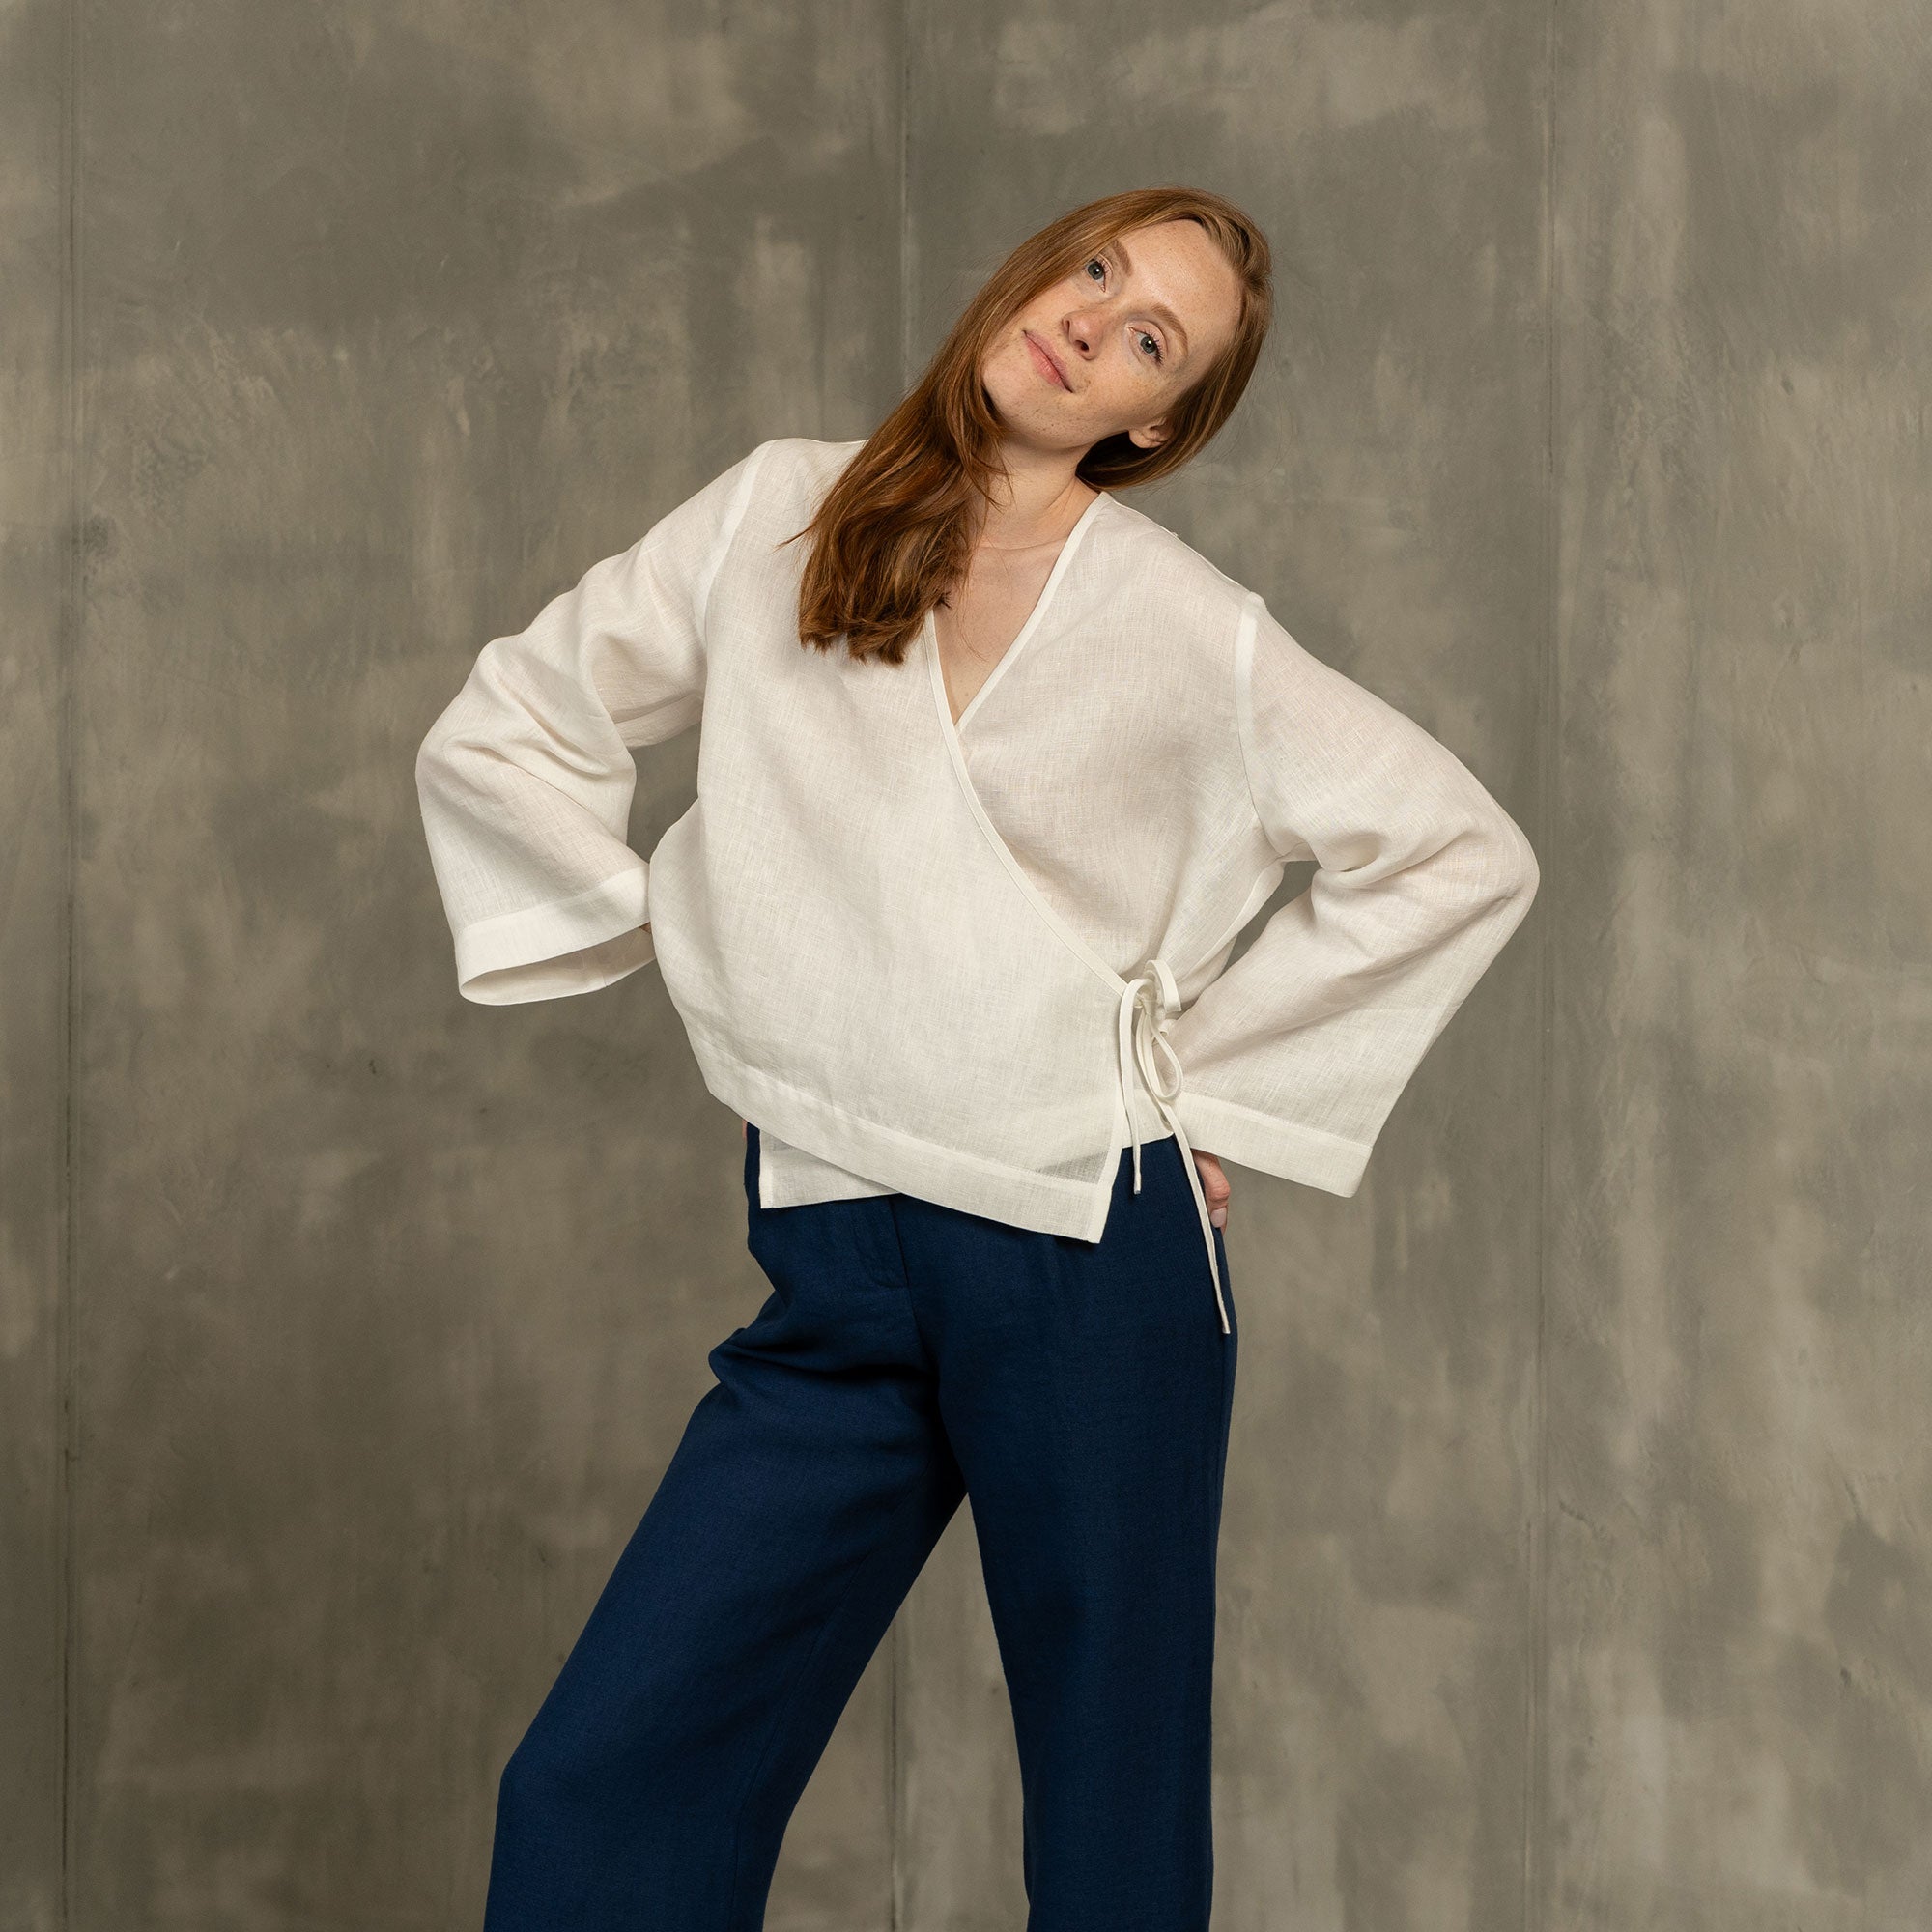 Linen wrap top Thea in Pure White color matched with Linen pleated pants Lotus in Storm Blue color